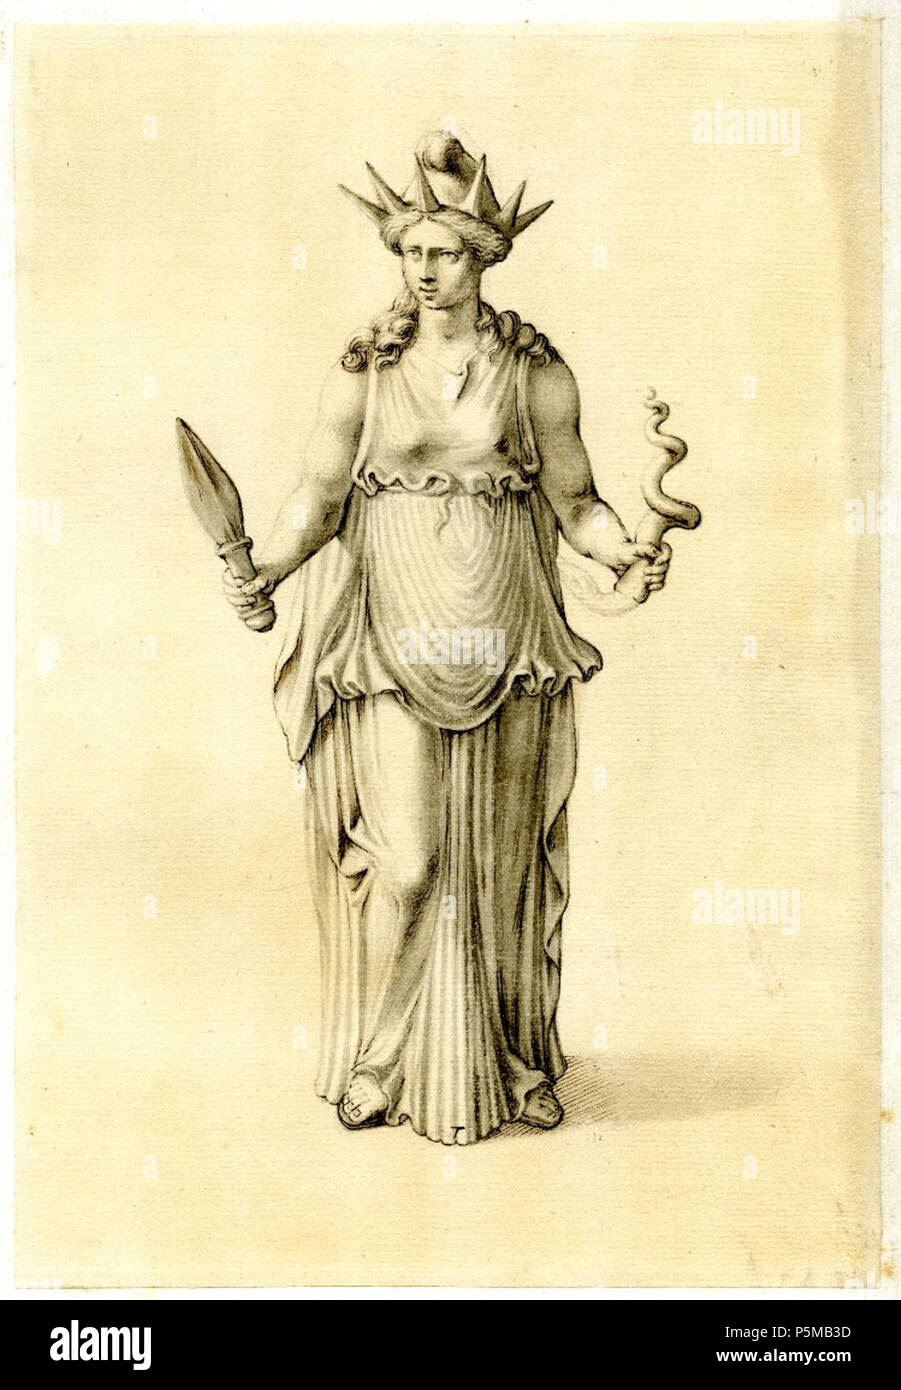 N/A. English: Hekate holding a swordi in the right hand, a snake in the left. (Detail of fol. 37 - Statuette of Triple-bodied Hekate). Pen, ink and grey wash. 29 June 2011.   Richard Cosway  (1742–1821)      Description English miniaturist  Date of birth/death 5 November 1742 4 July 1821  Location of birth/death Tiverton, Devon London  Work location London; Paris  Authority control  : Q2539929 VIAF:40191108 ISNI:0000 0001 1626 2345 ULAN:500115280 LCCN:n93108180 NLA:35510021 WorldCat 97 AN00969956 001 l Stock Photo